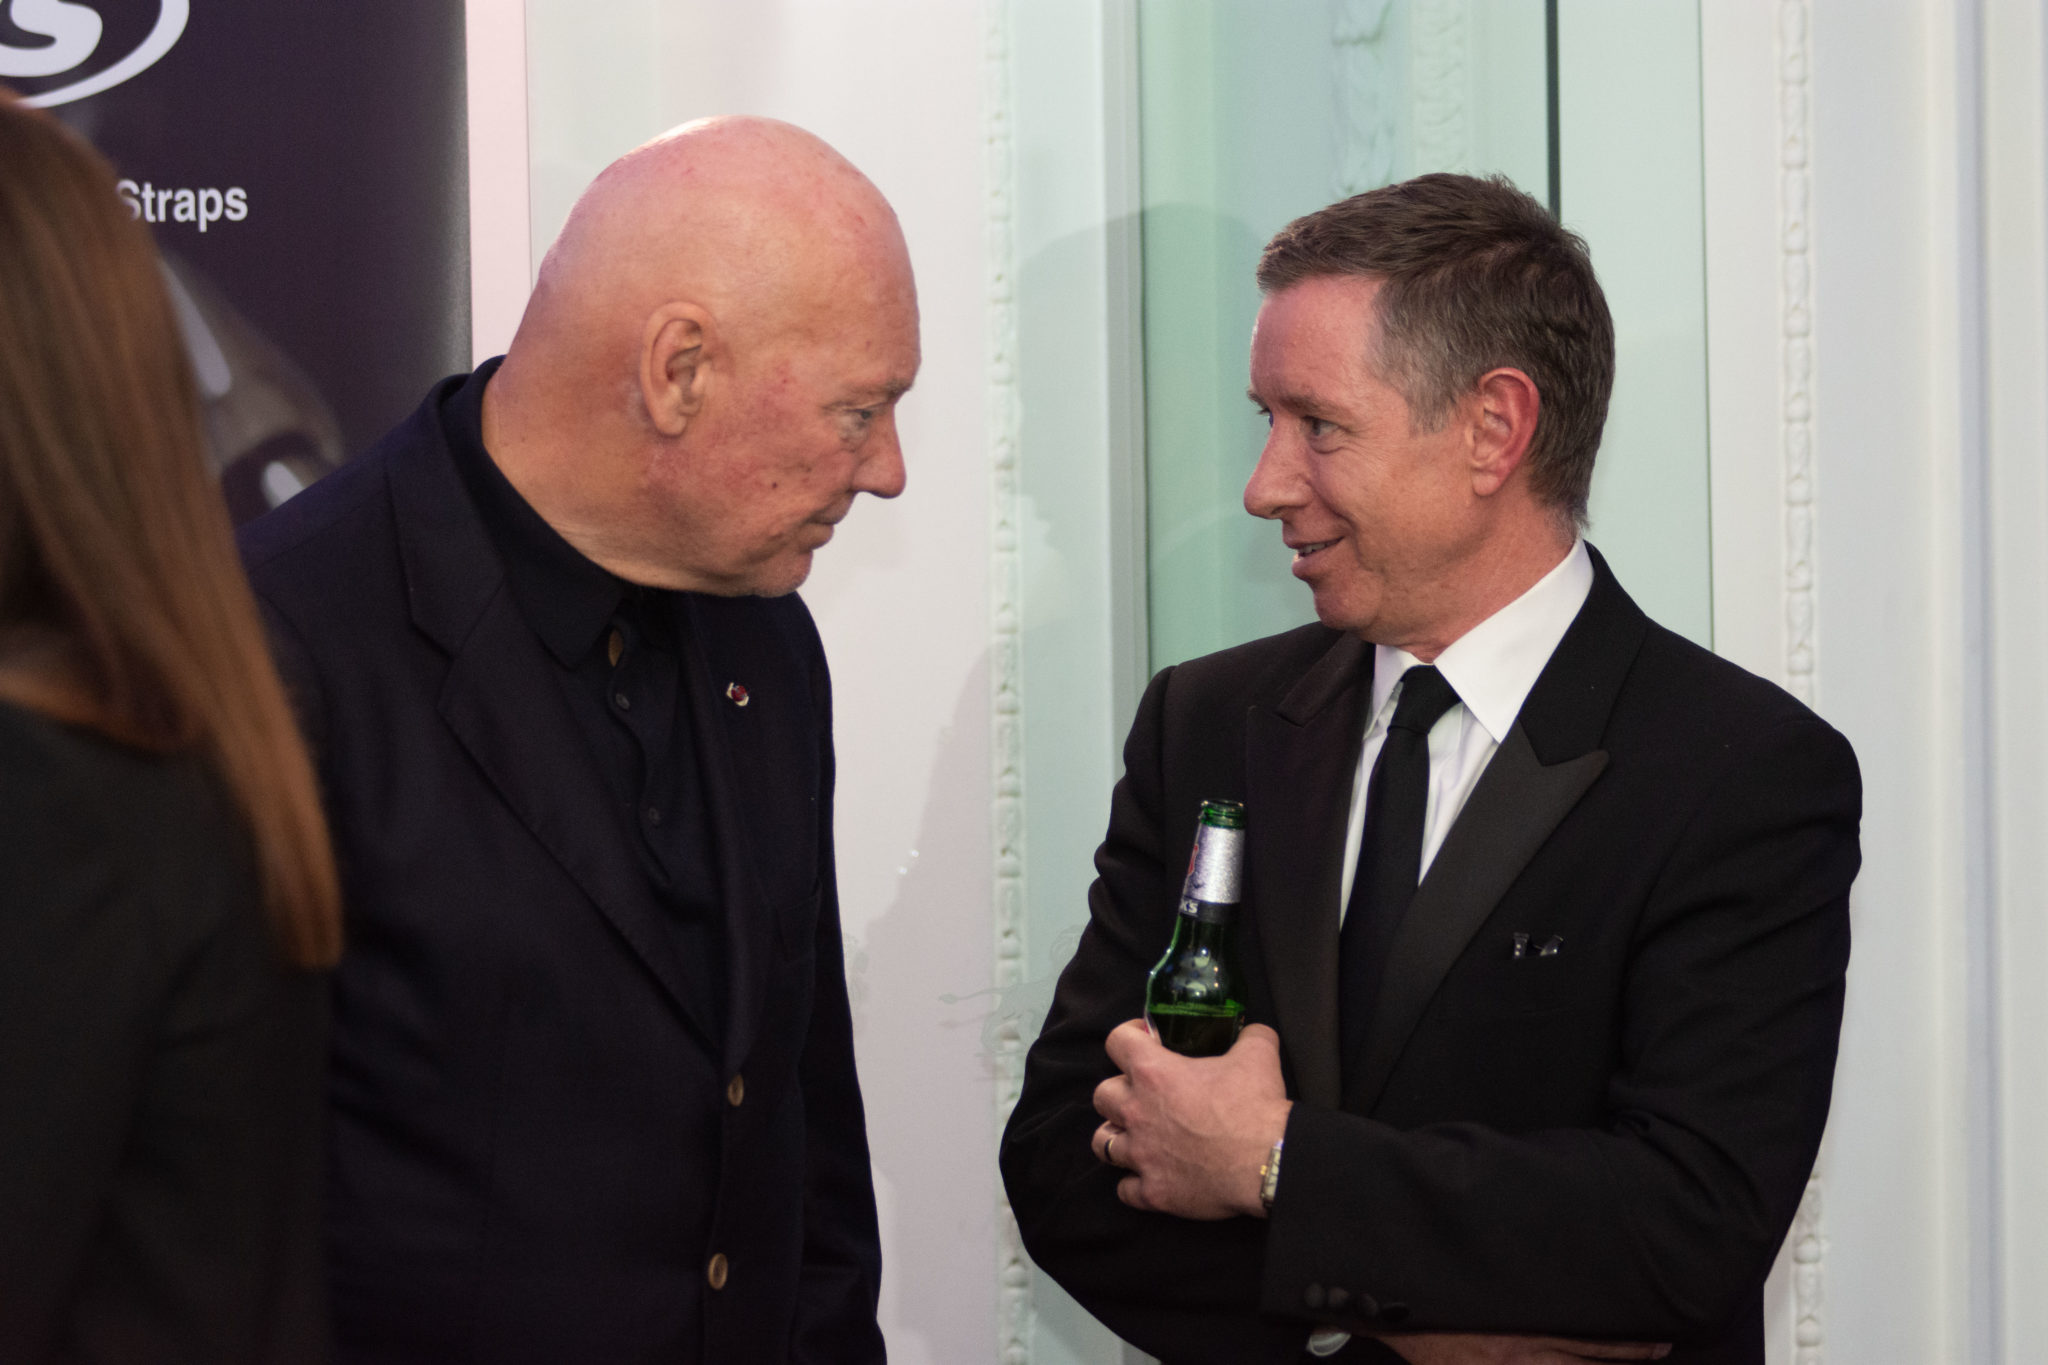 THE BIG INTERVIEW: Jean-Claude Biver on waiting lists, unicorn